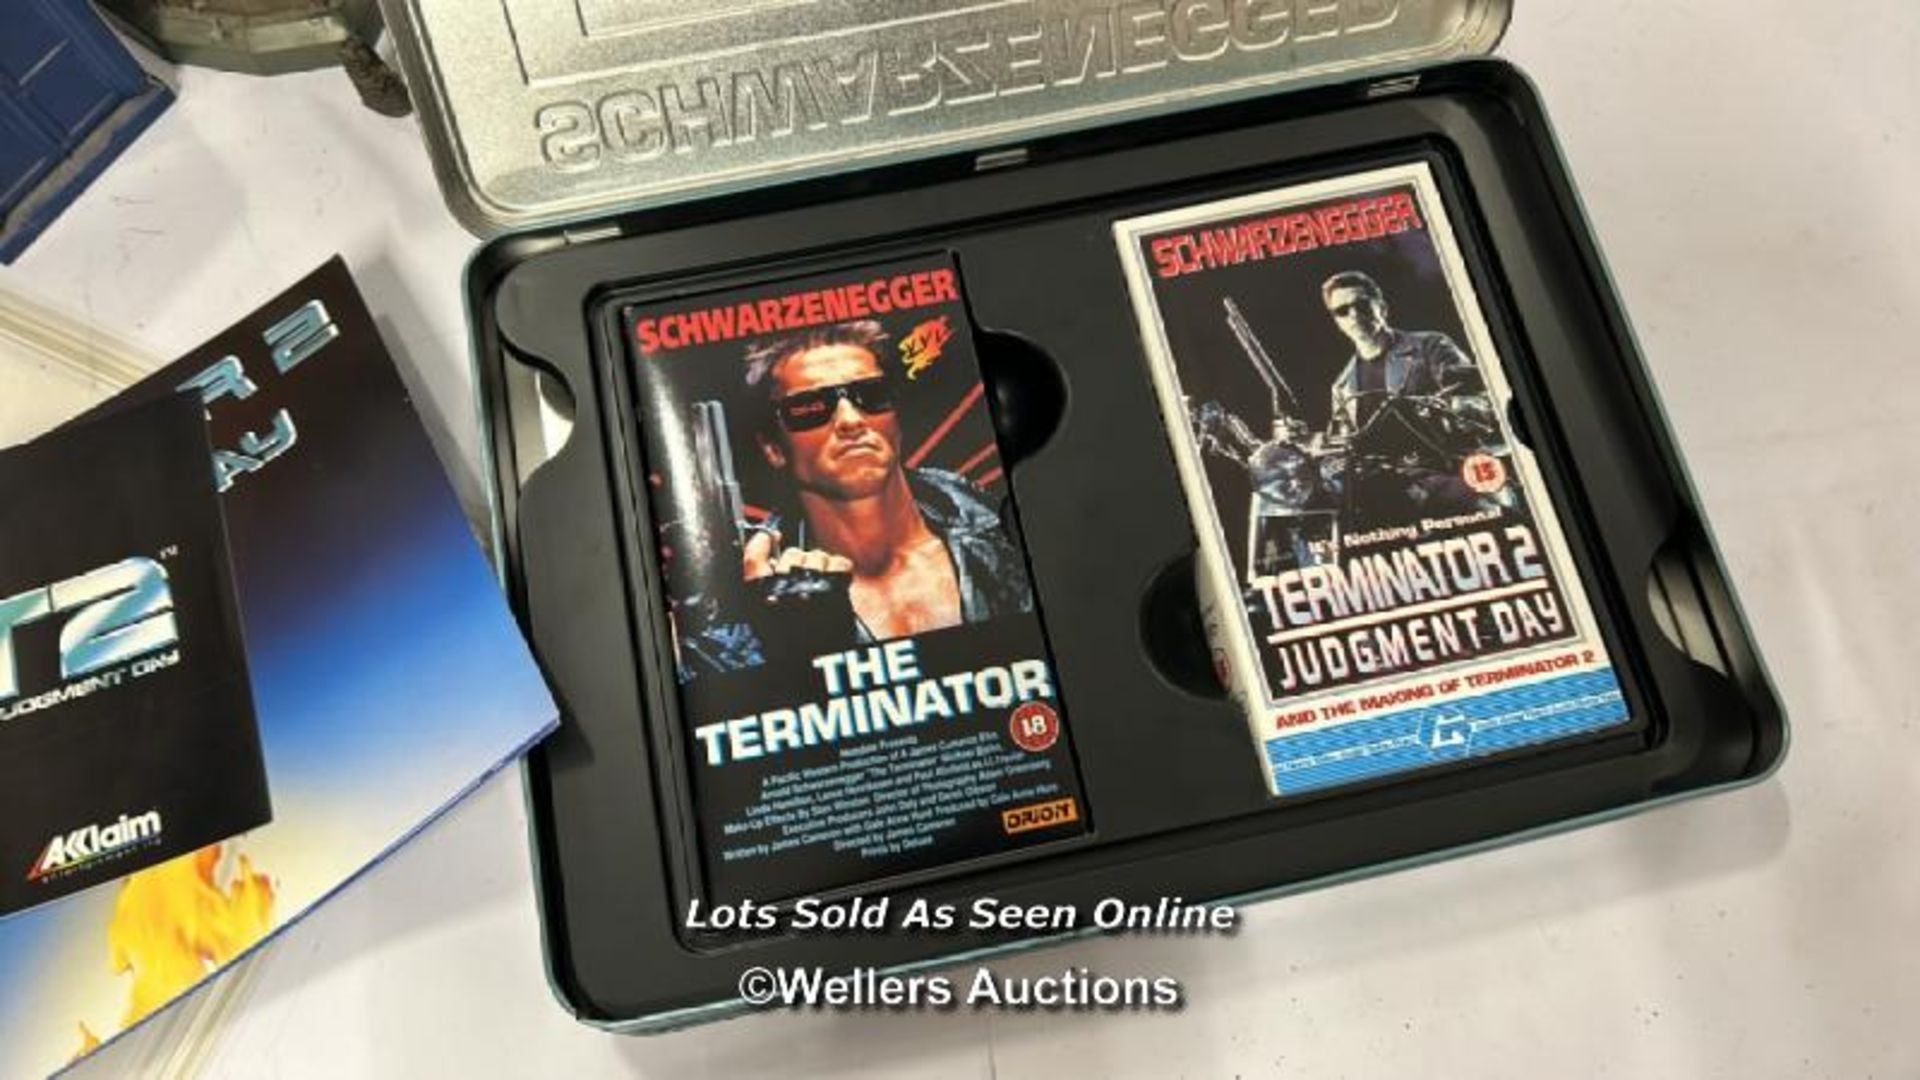 Film & TV related toys and VHS including Dr Who, Sin City, Teen Titans and Terminator 2 VHS box - Image 6 of 6